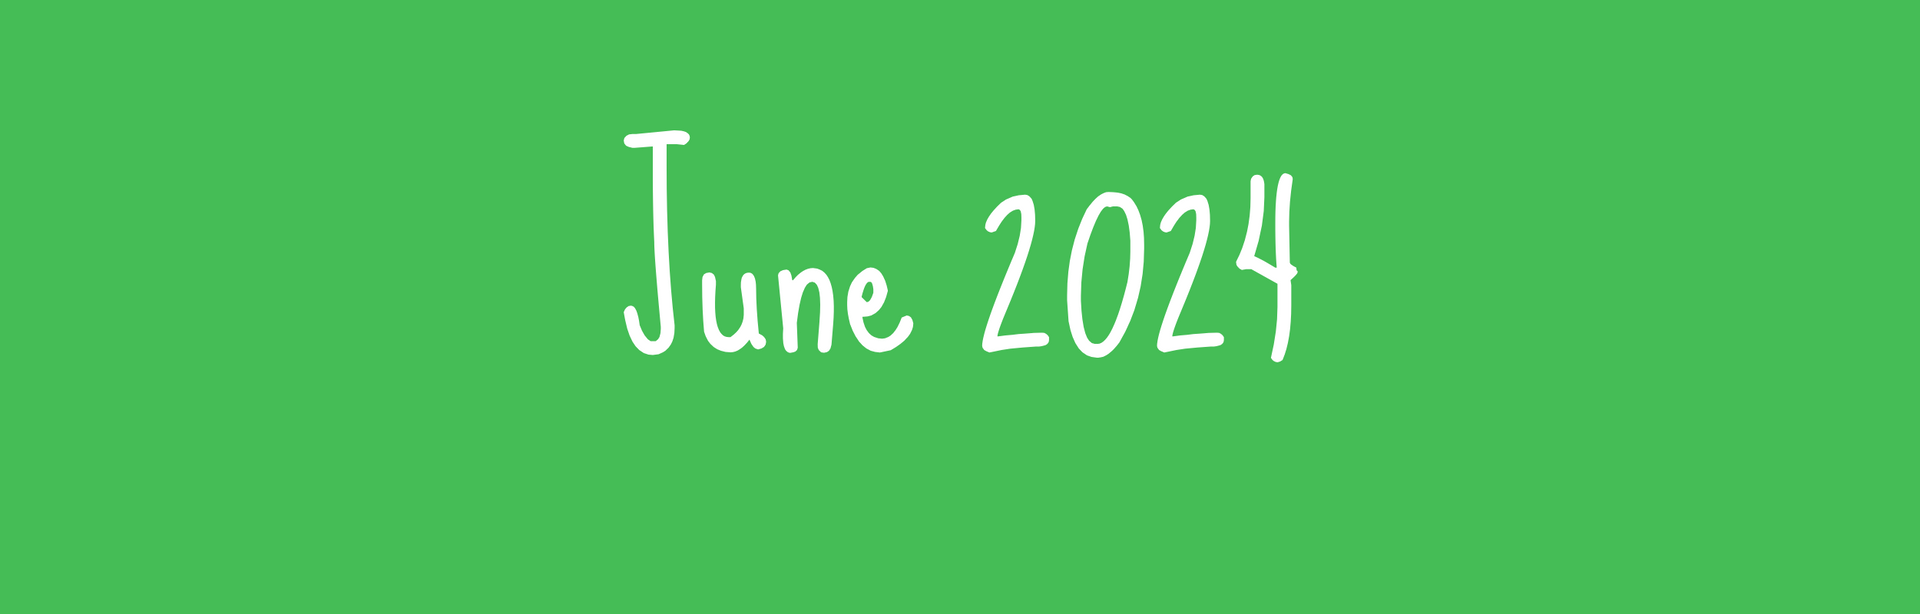 the word june is written in white on a green background .